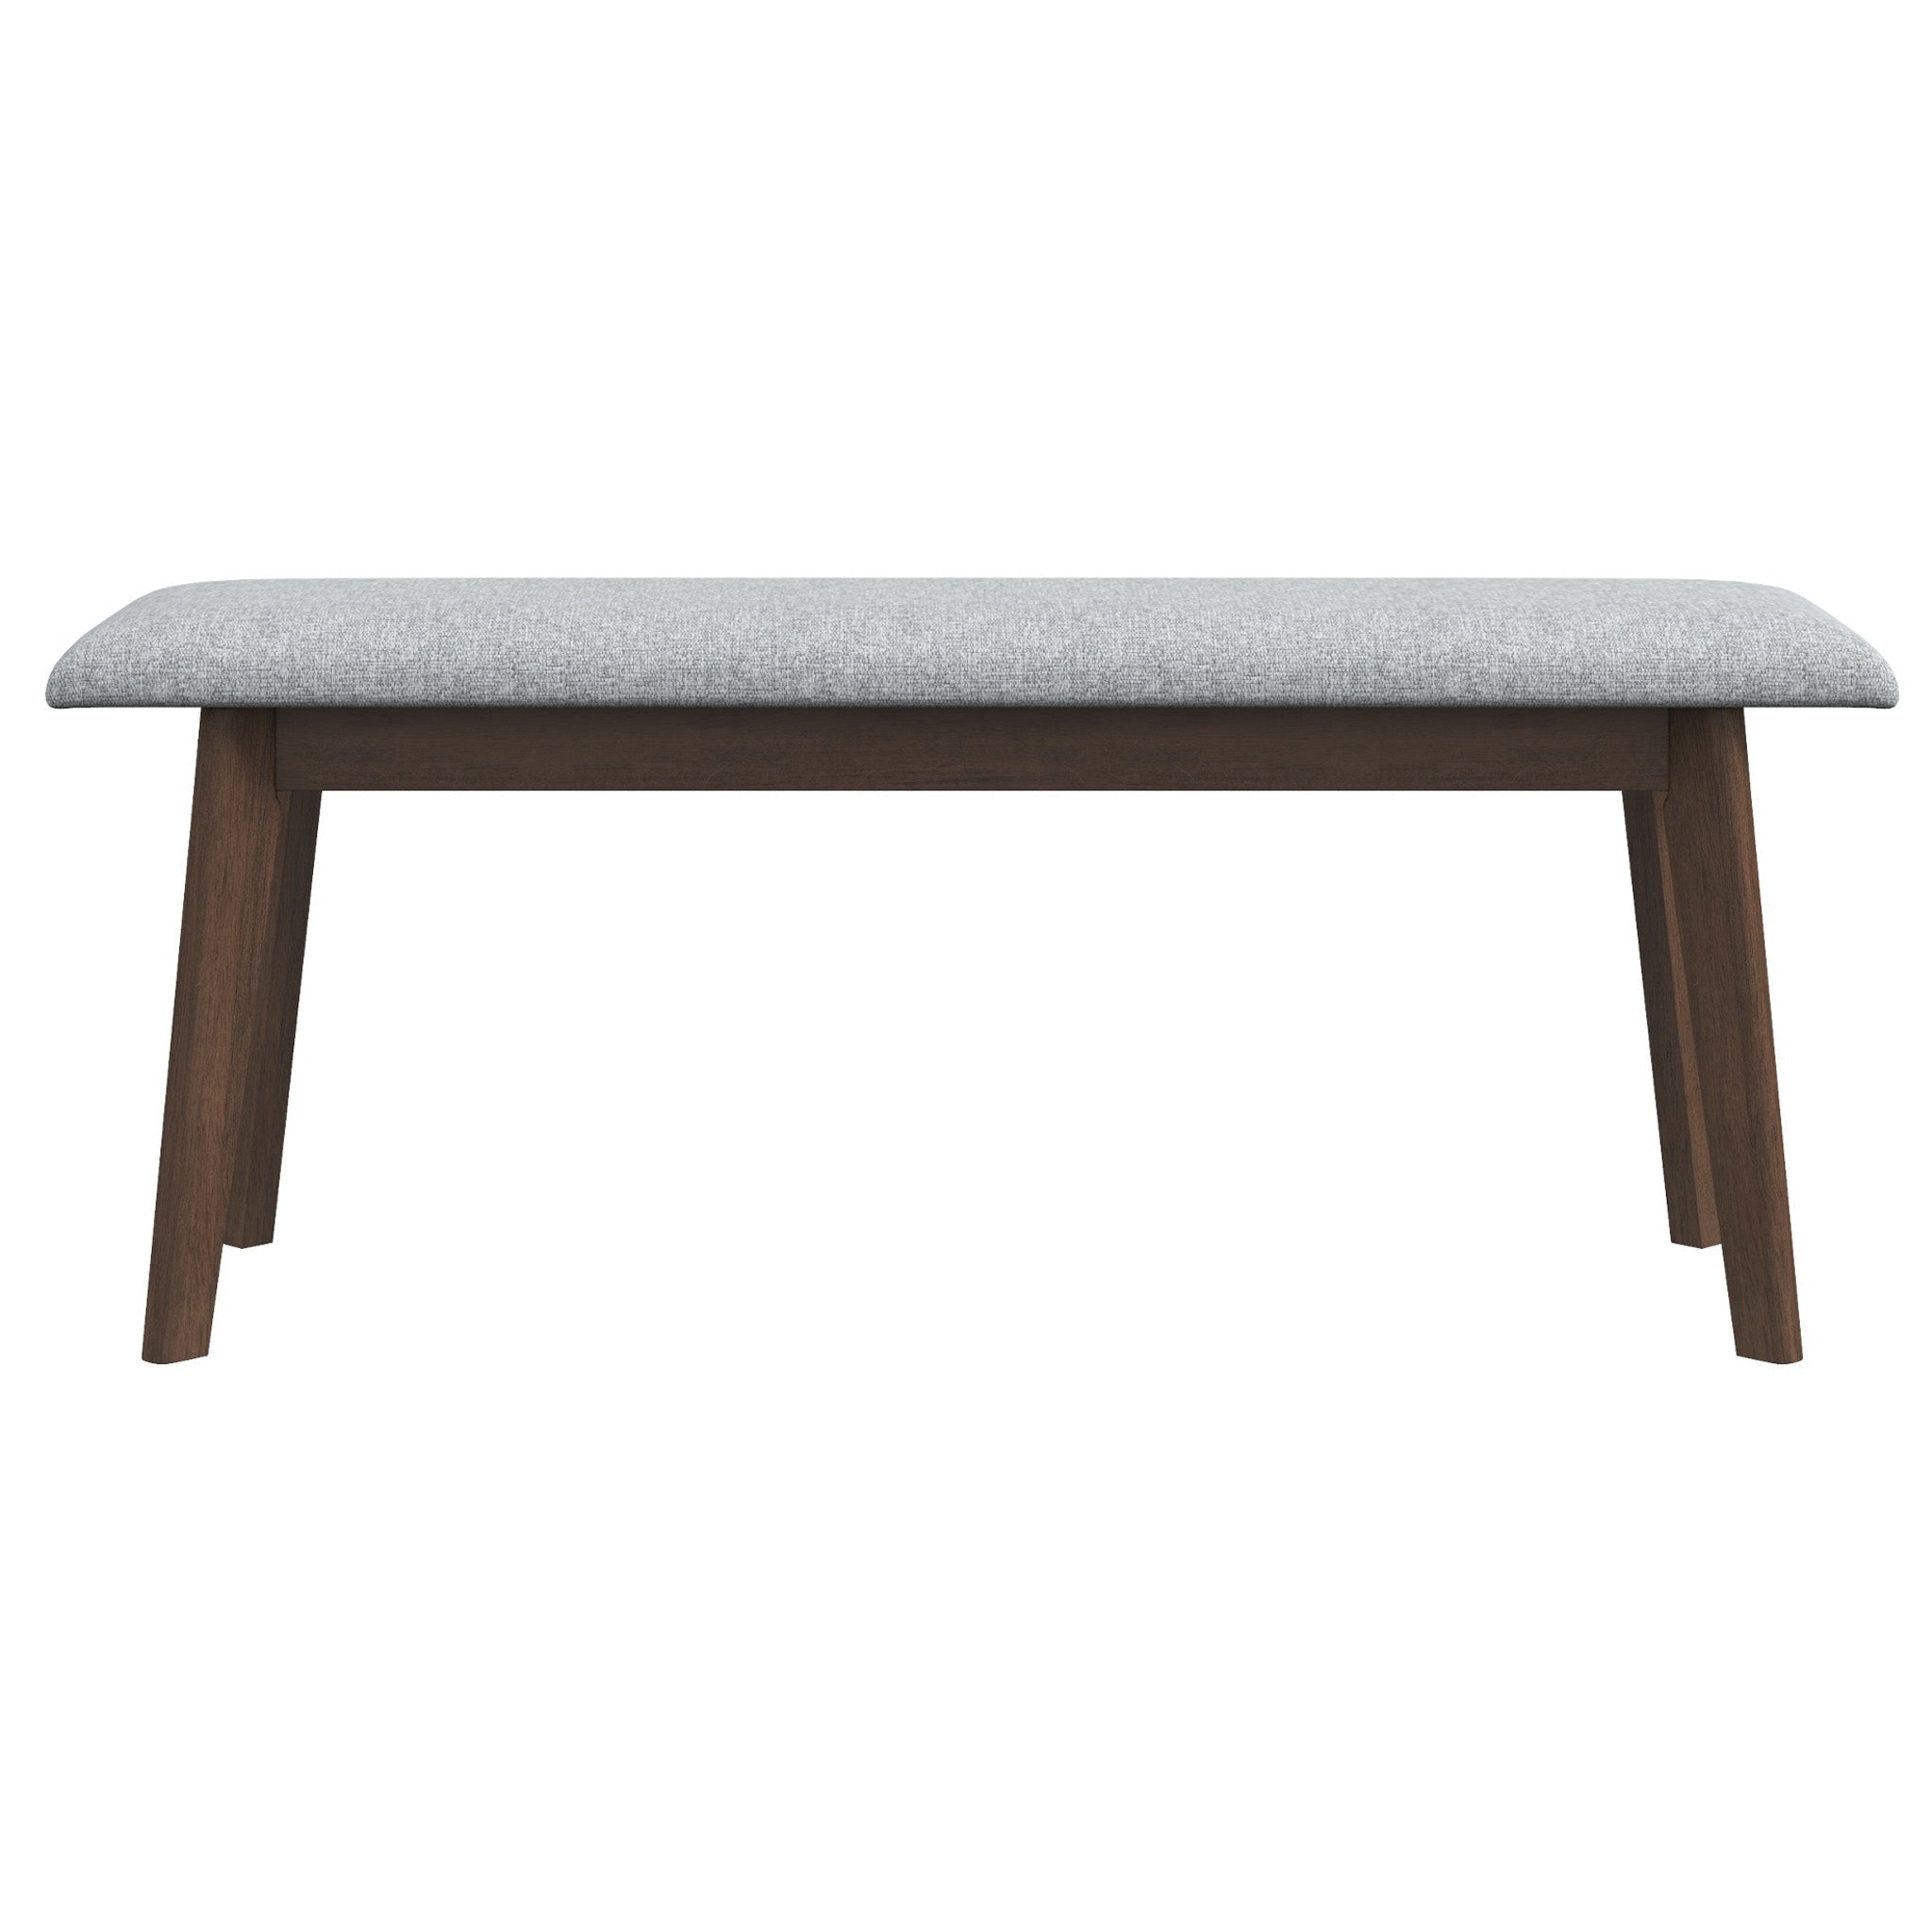 Gleam Fabric Upholstered Solid Wood Bench - Benches